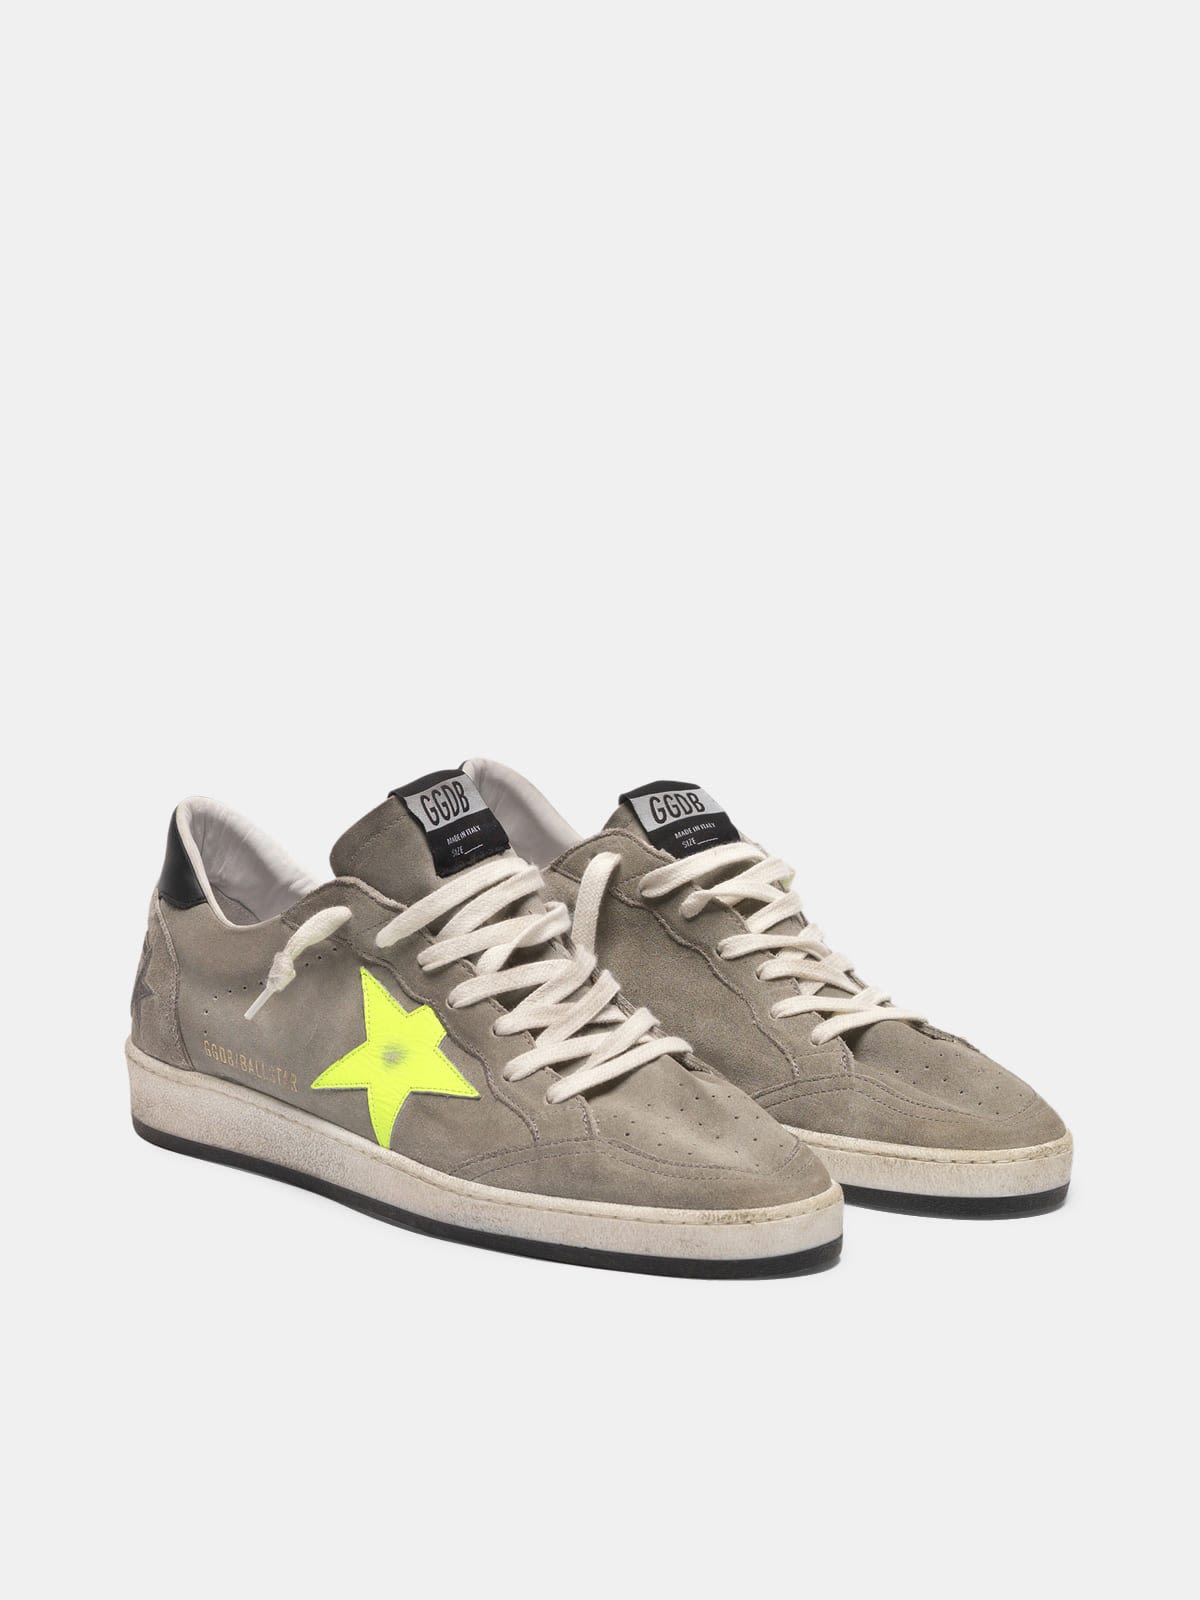 Ball Star sneakers in grey suede with dayglow star